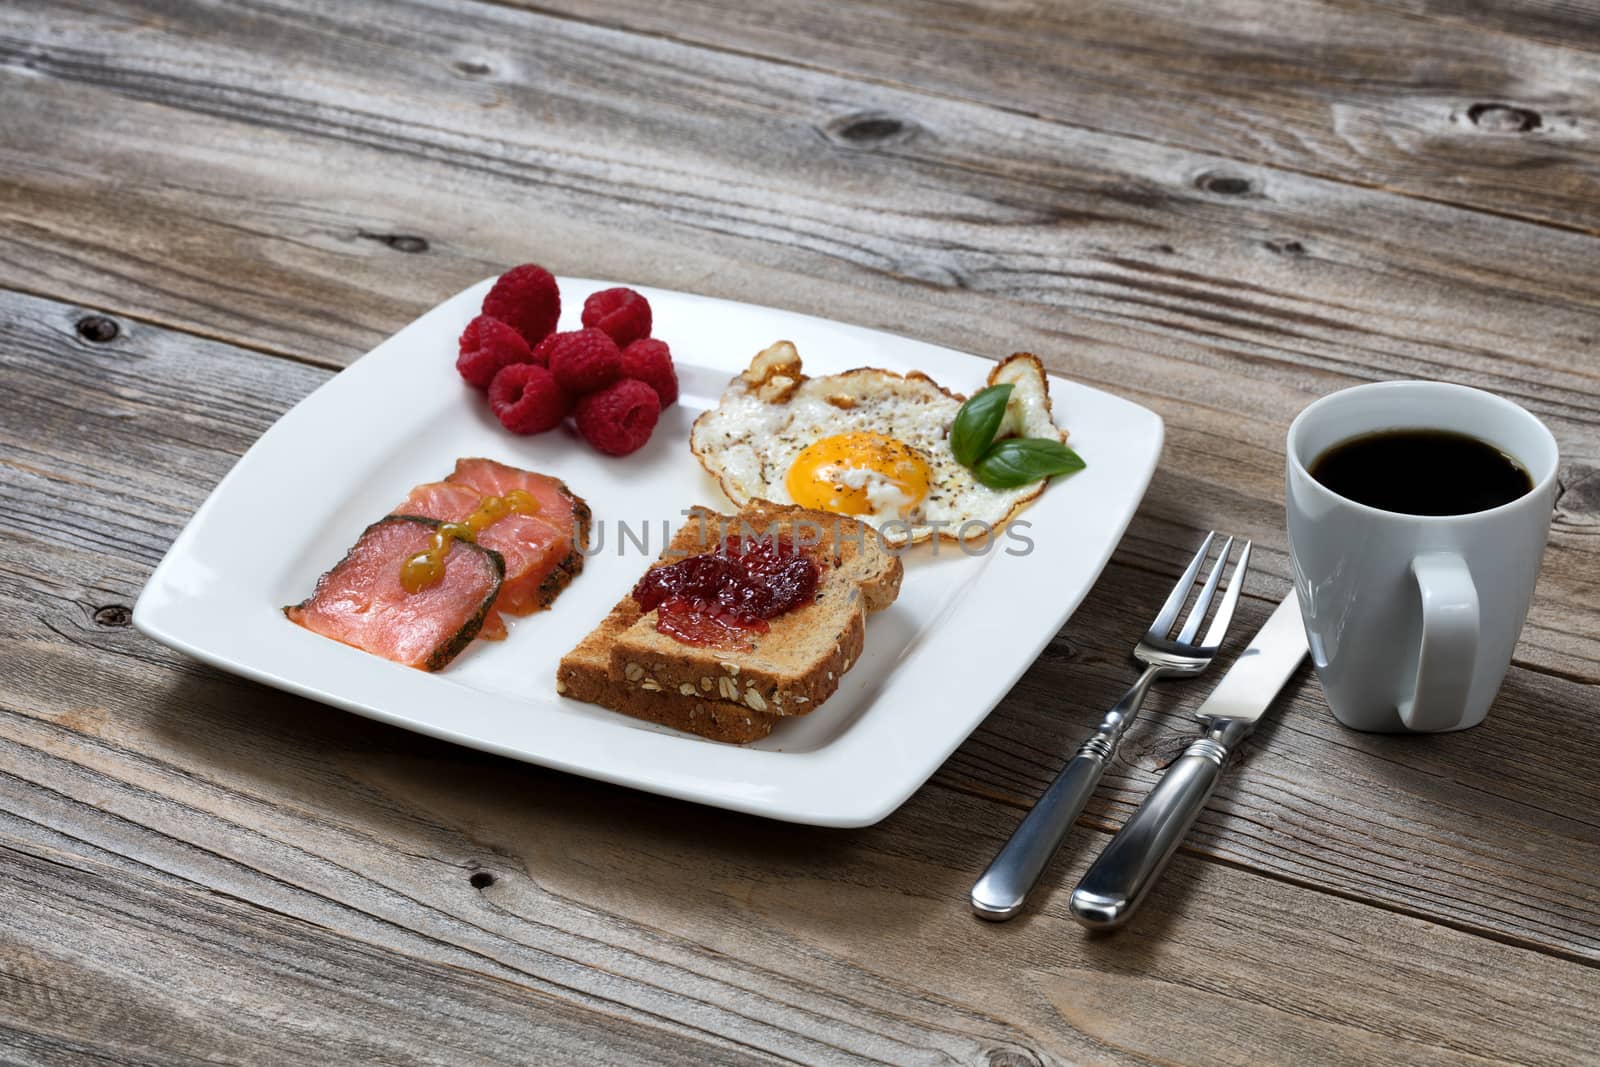 Freshly cooked morning meal on rustic wooden table  by tab1962